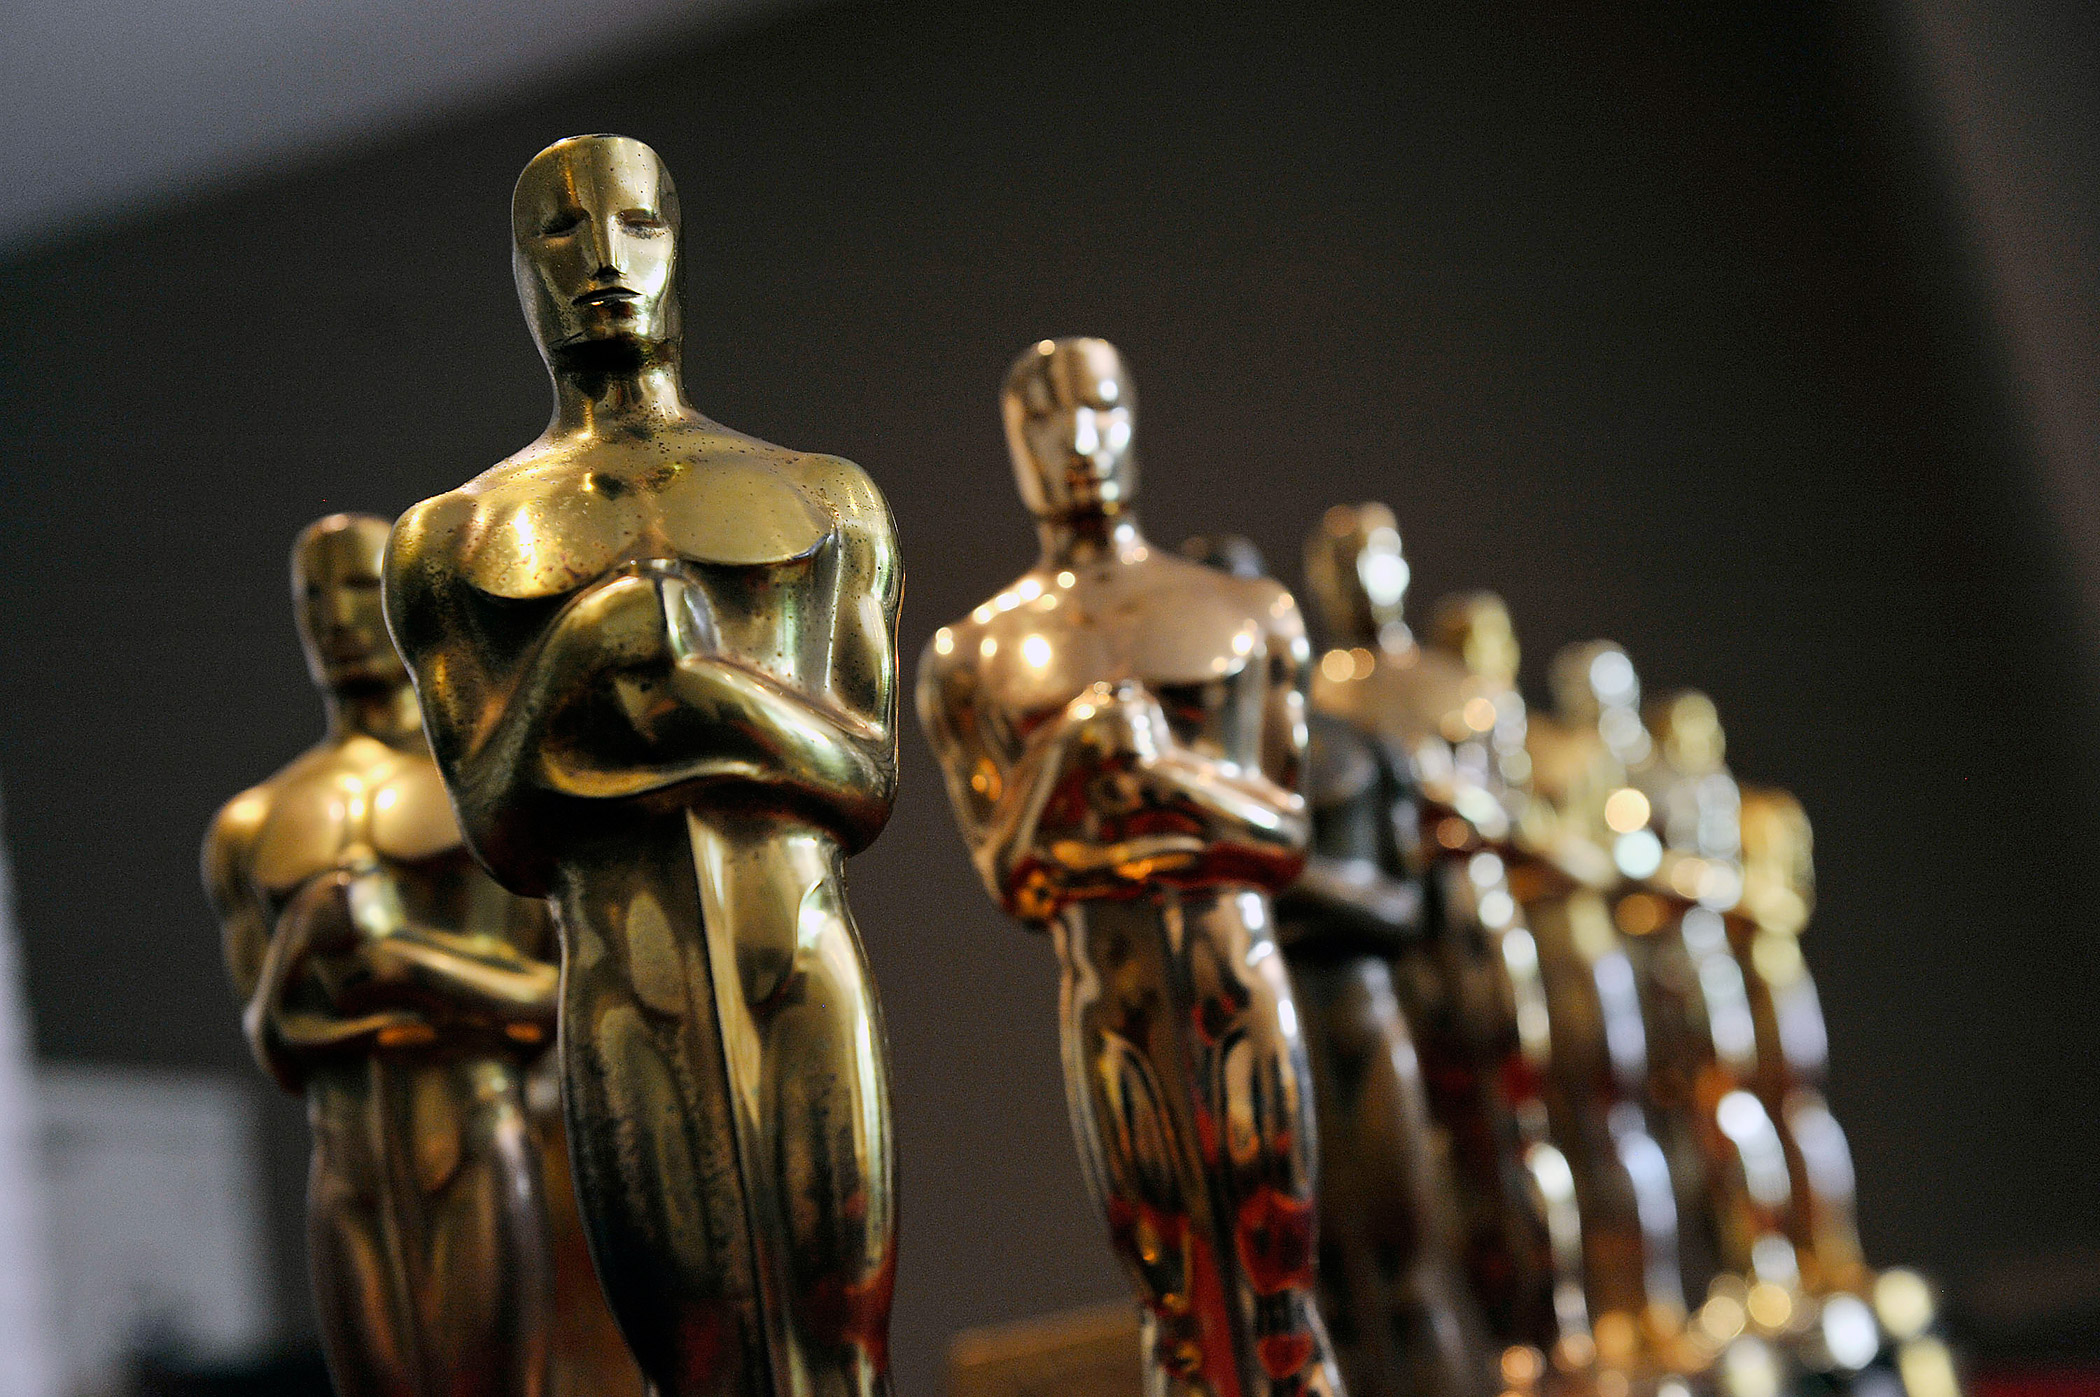 Nate D. Sanders Auctions Collection Of Academy Award Oscar Statuettes Set To Be Auctioned